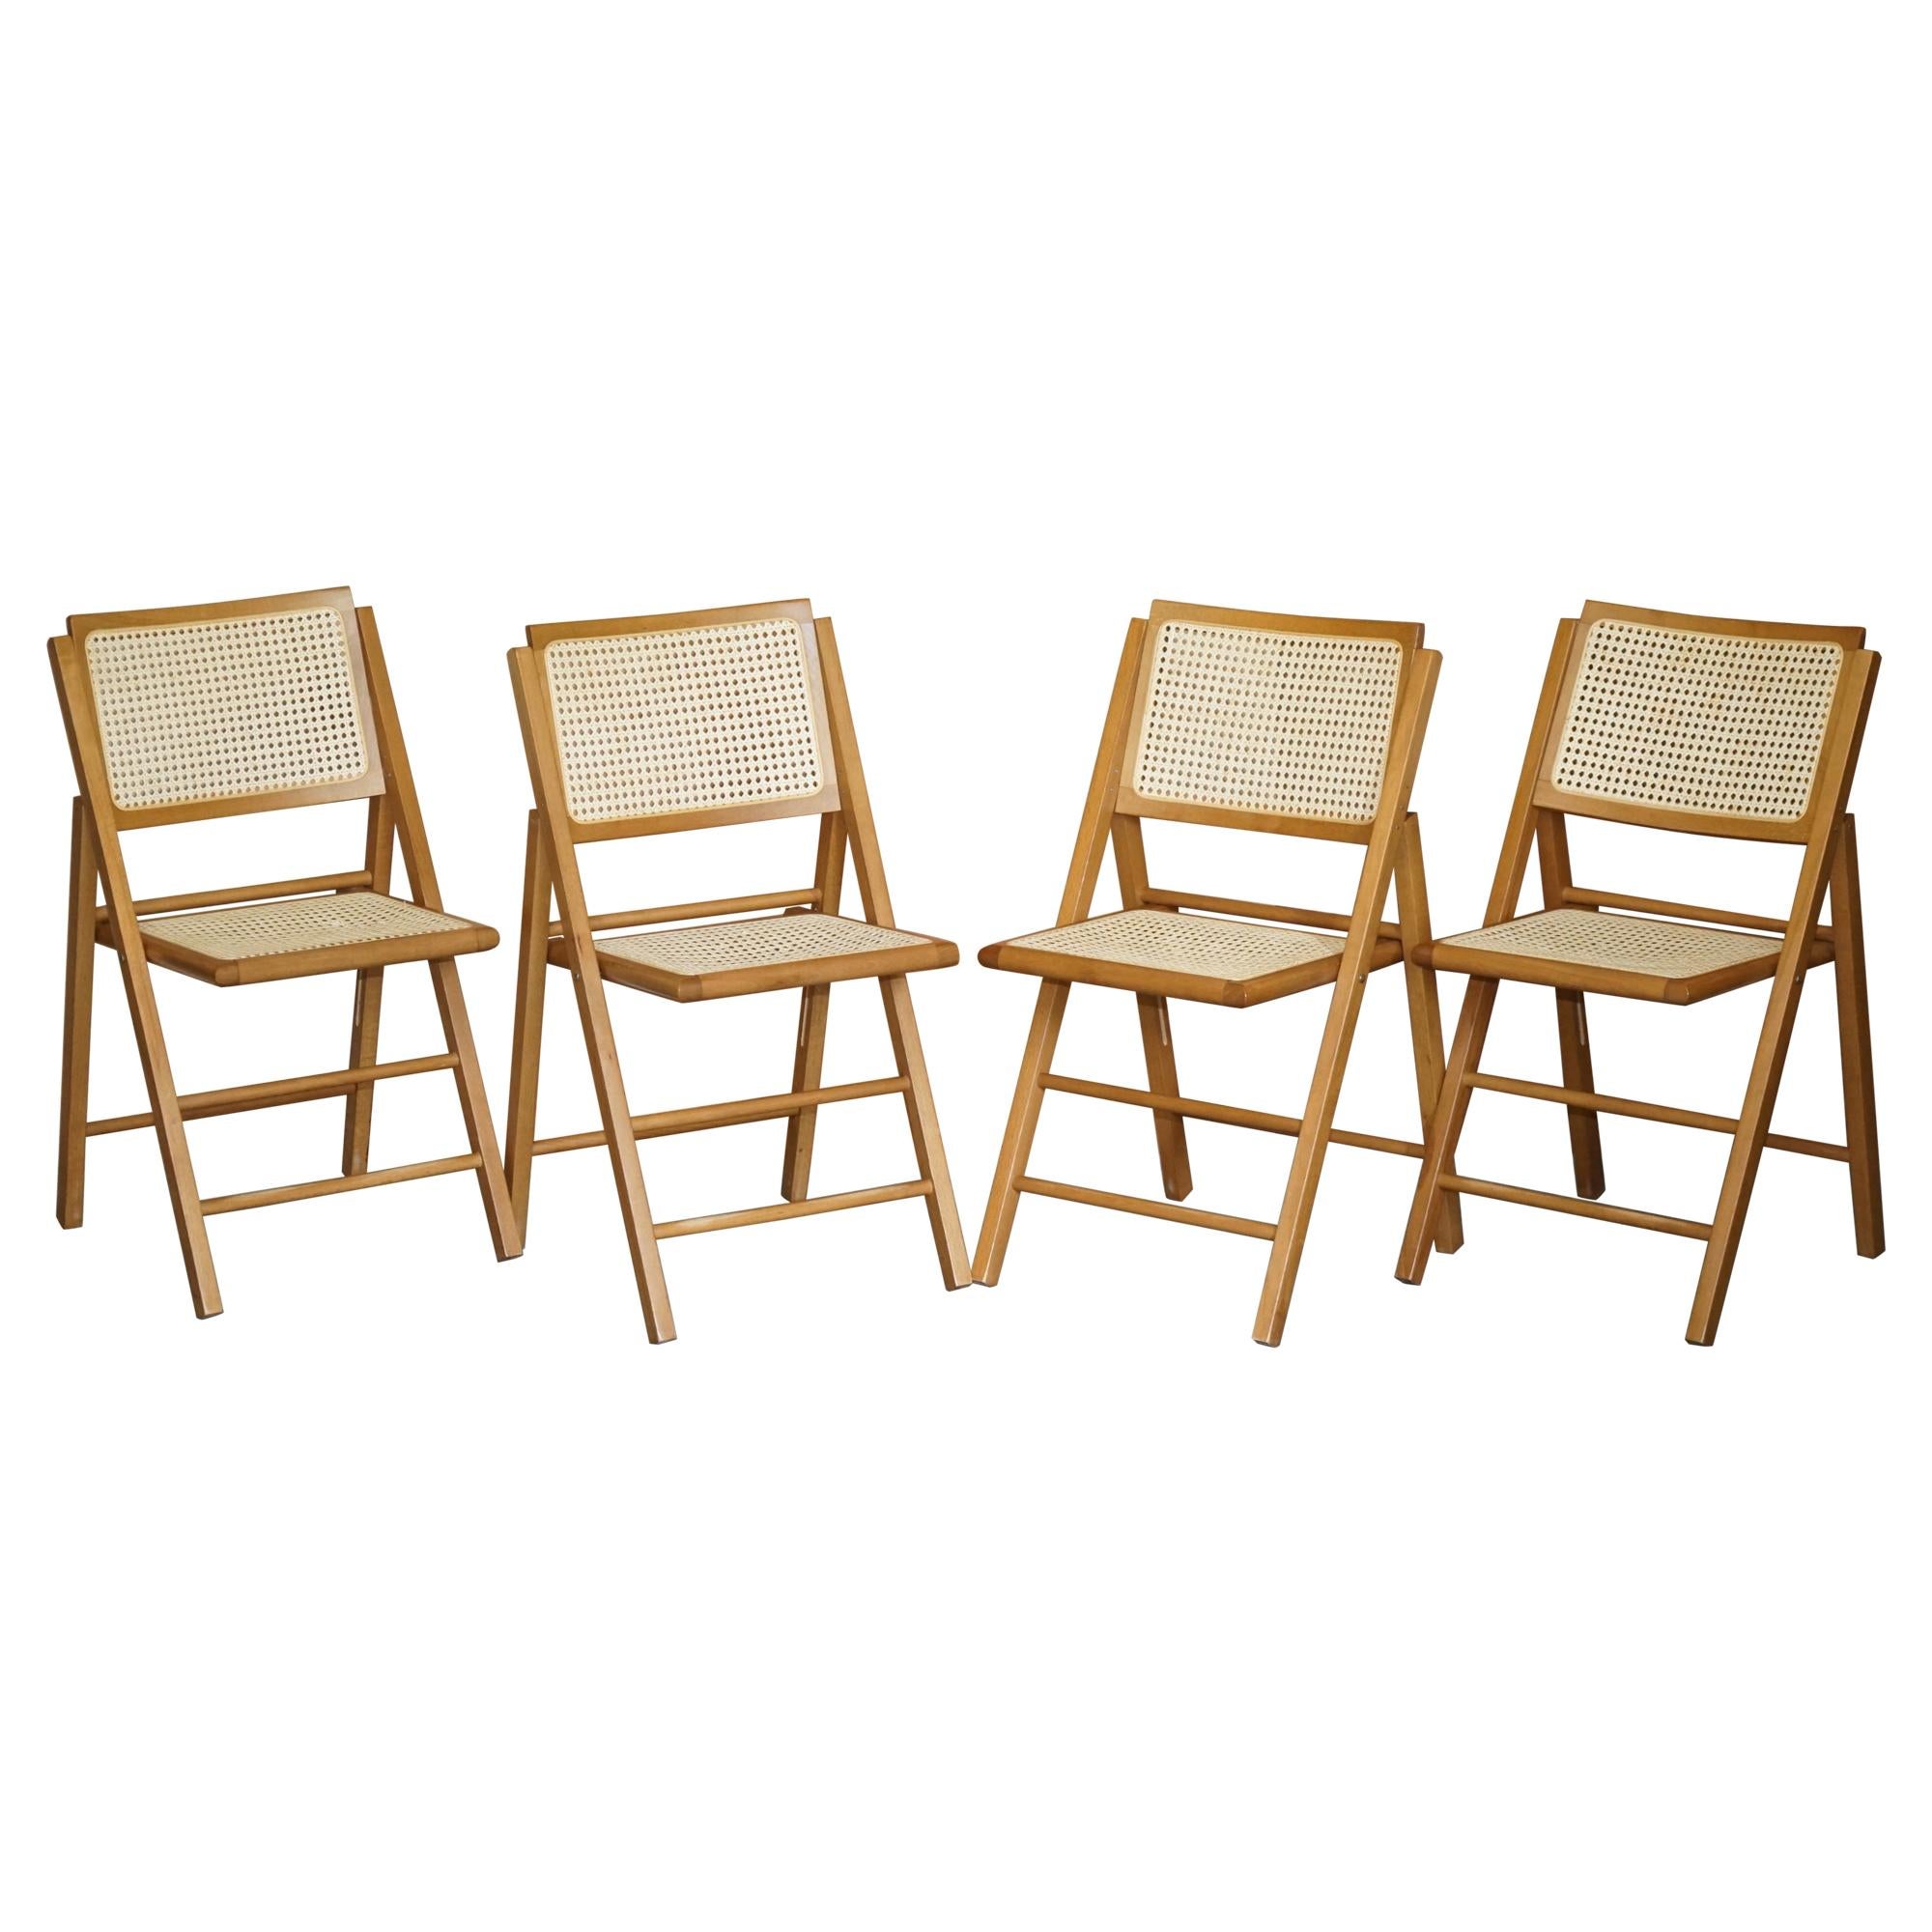 Four Vintage Beech Wood Bergere Rattan Folding Military Campaign Style Chairs